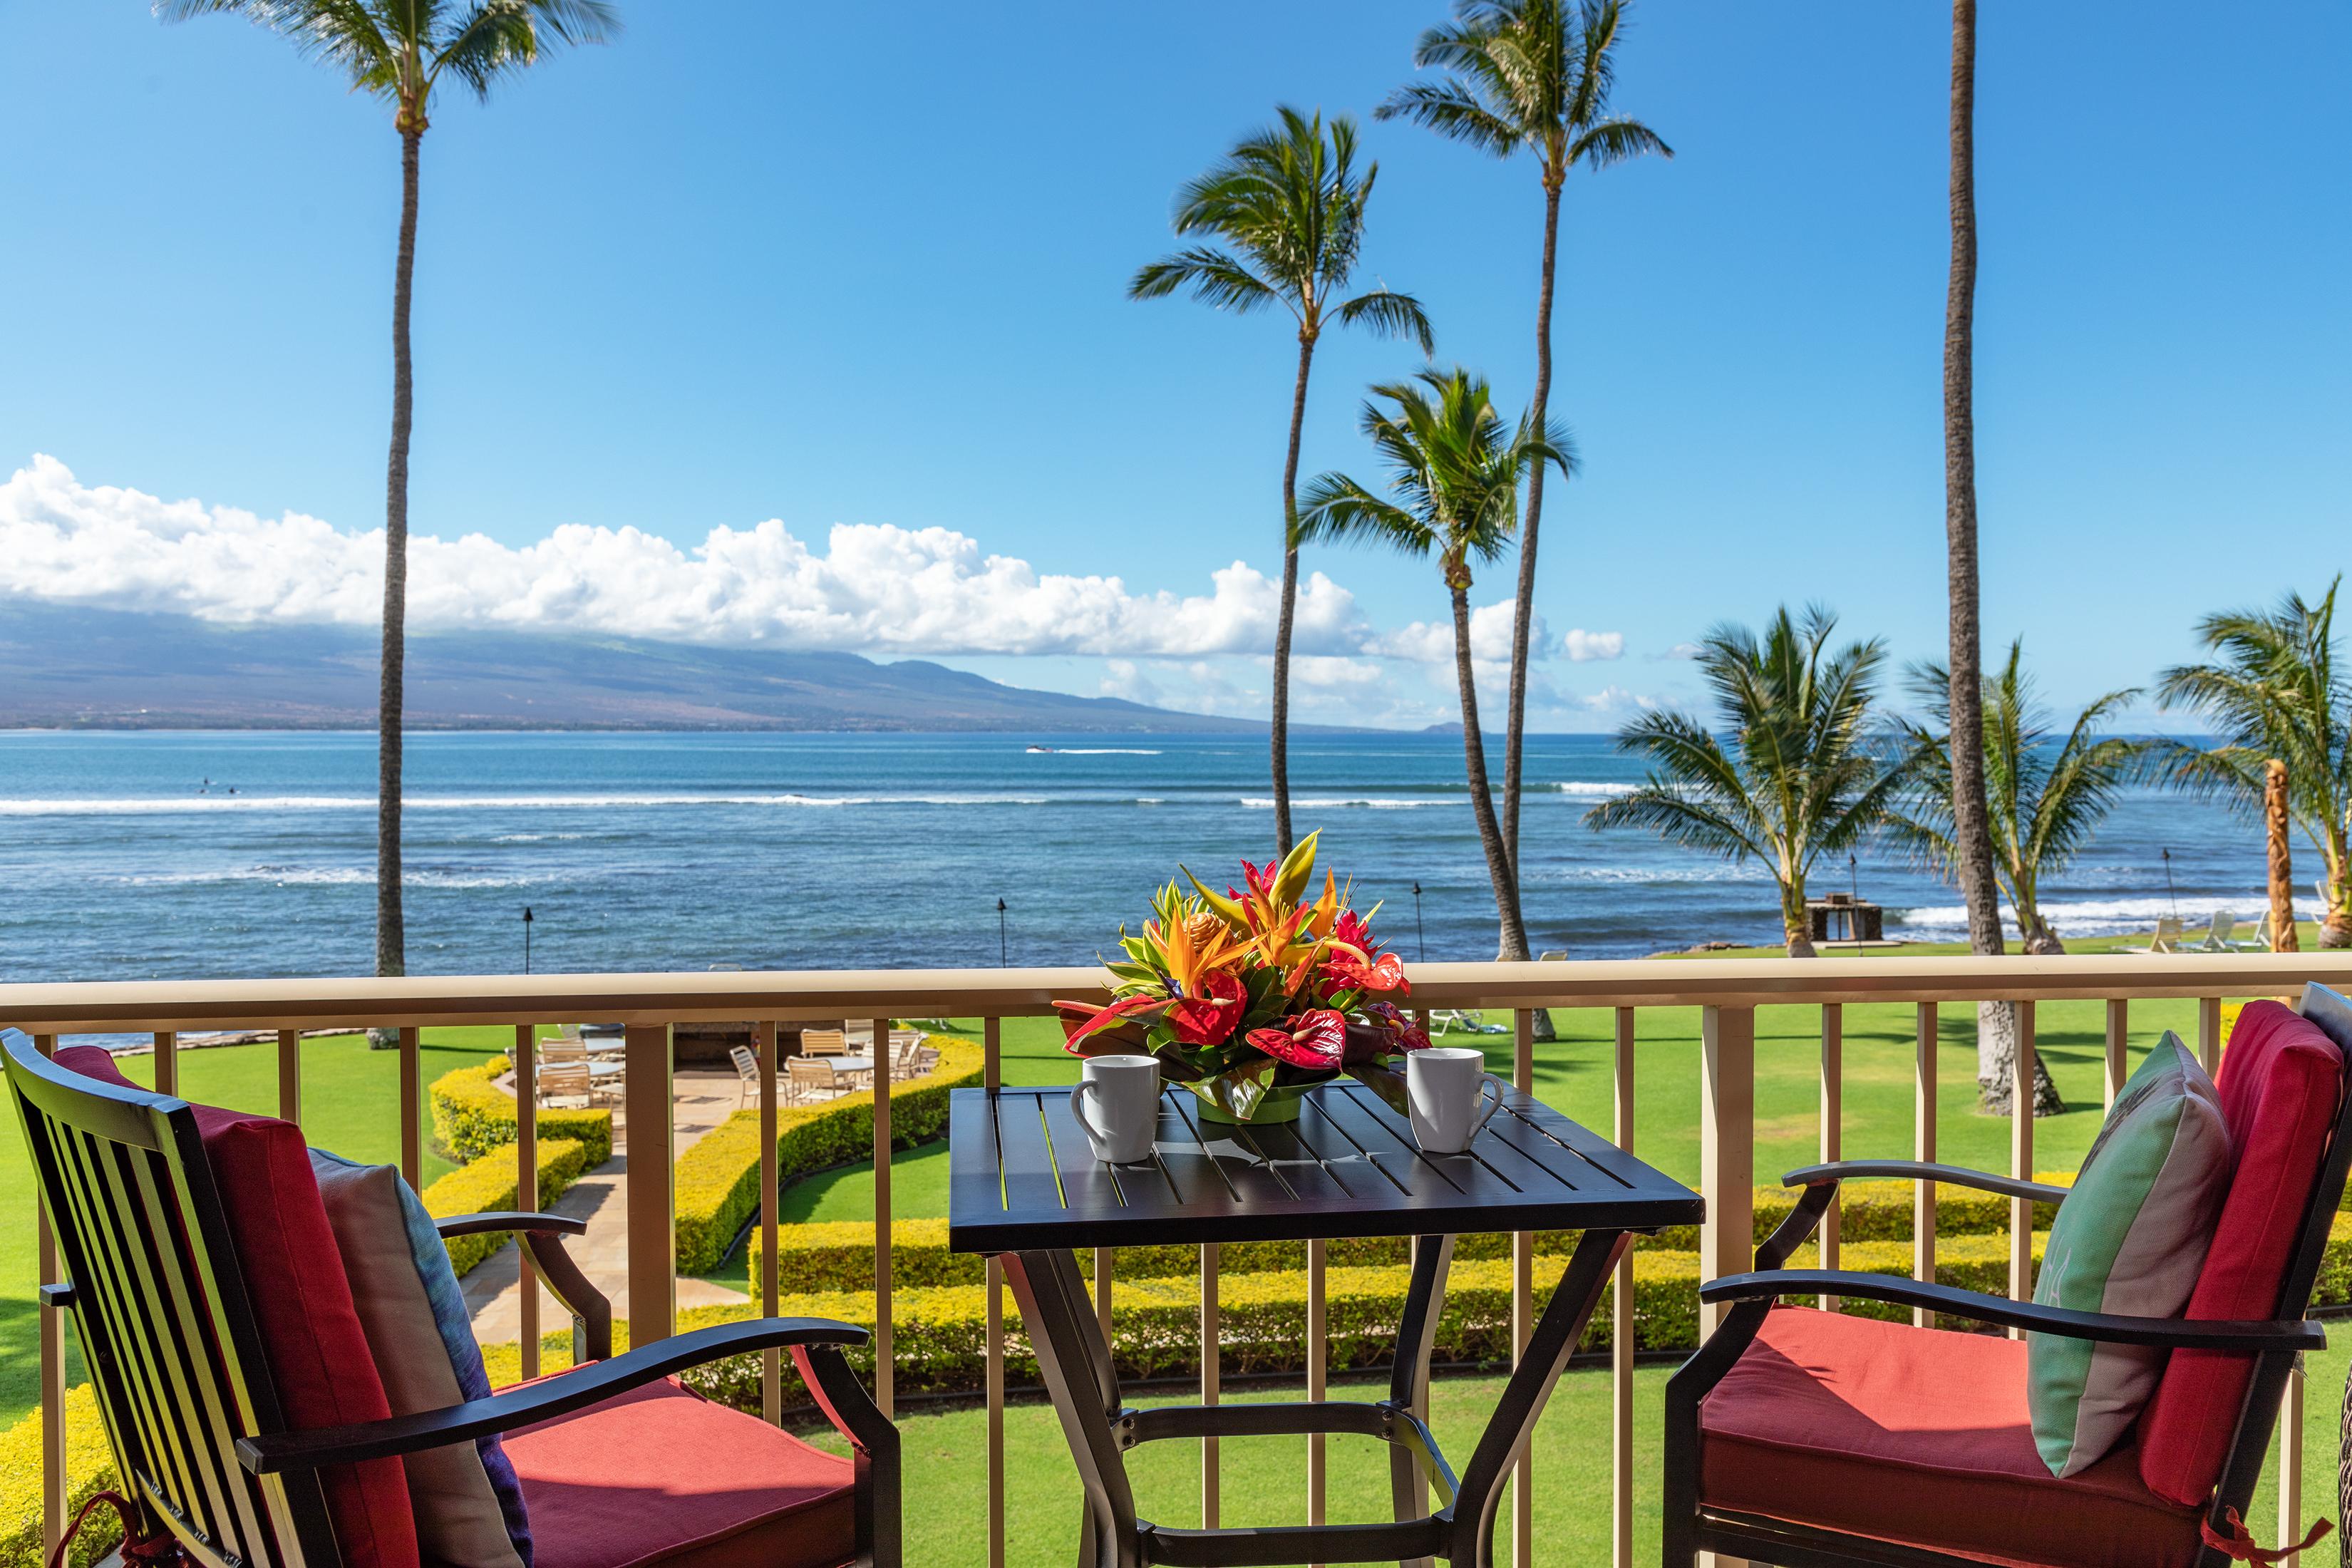 Property Image 1 - Sensational Maui Abode with Dazzling Ocean Views